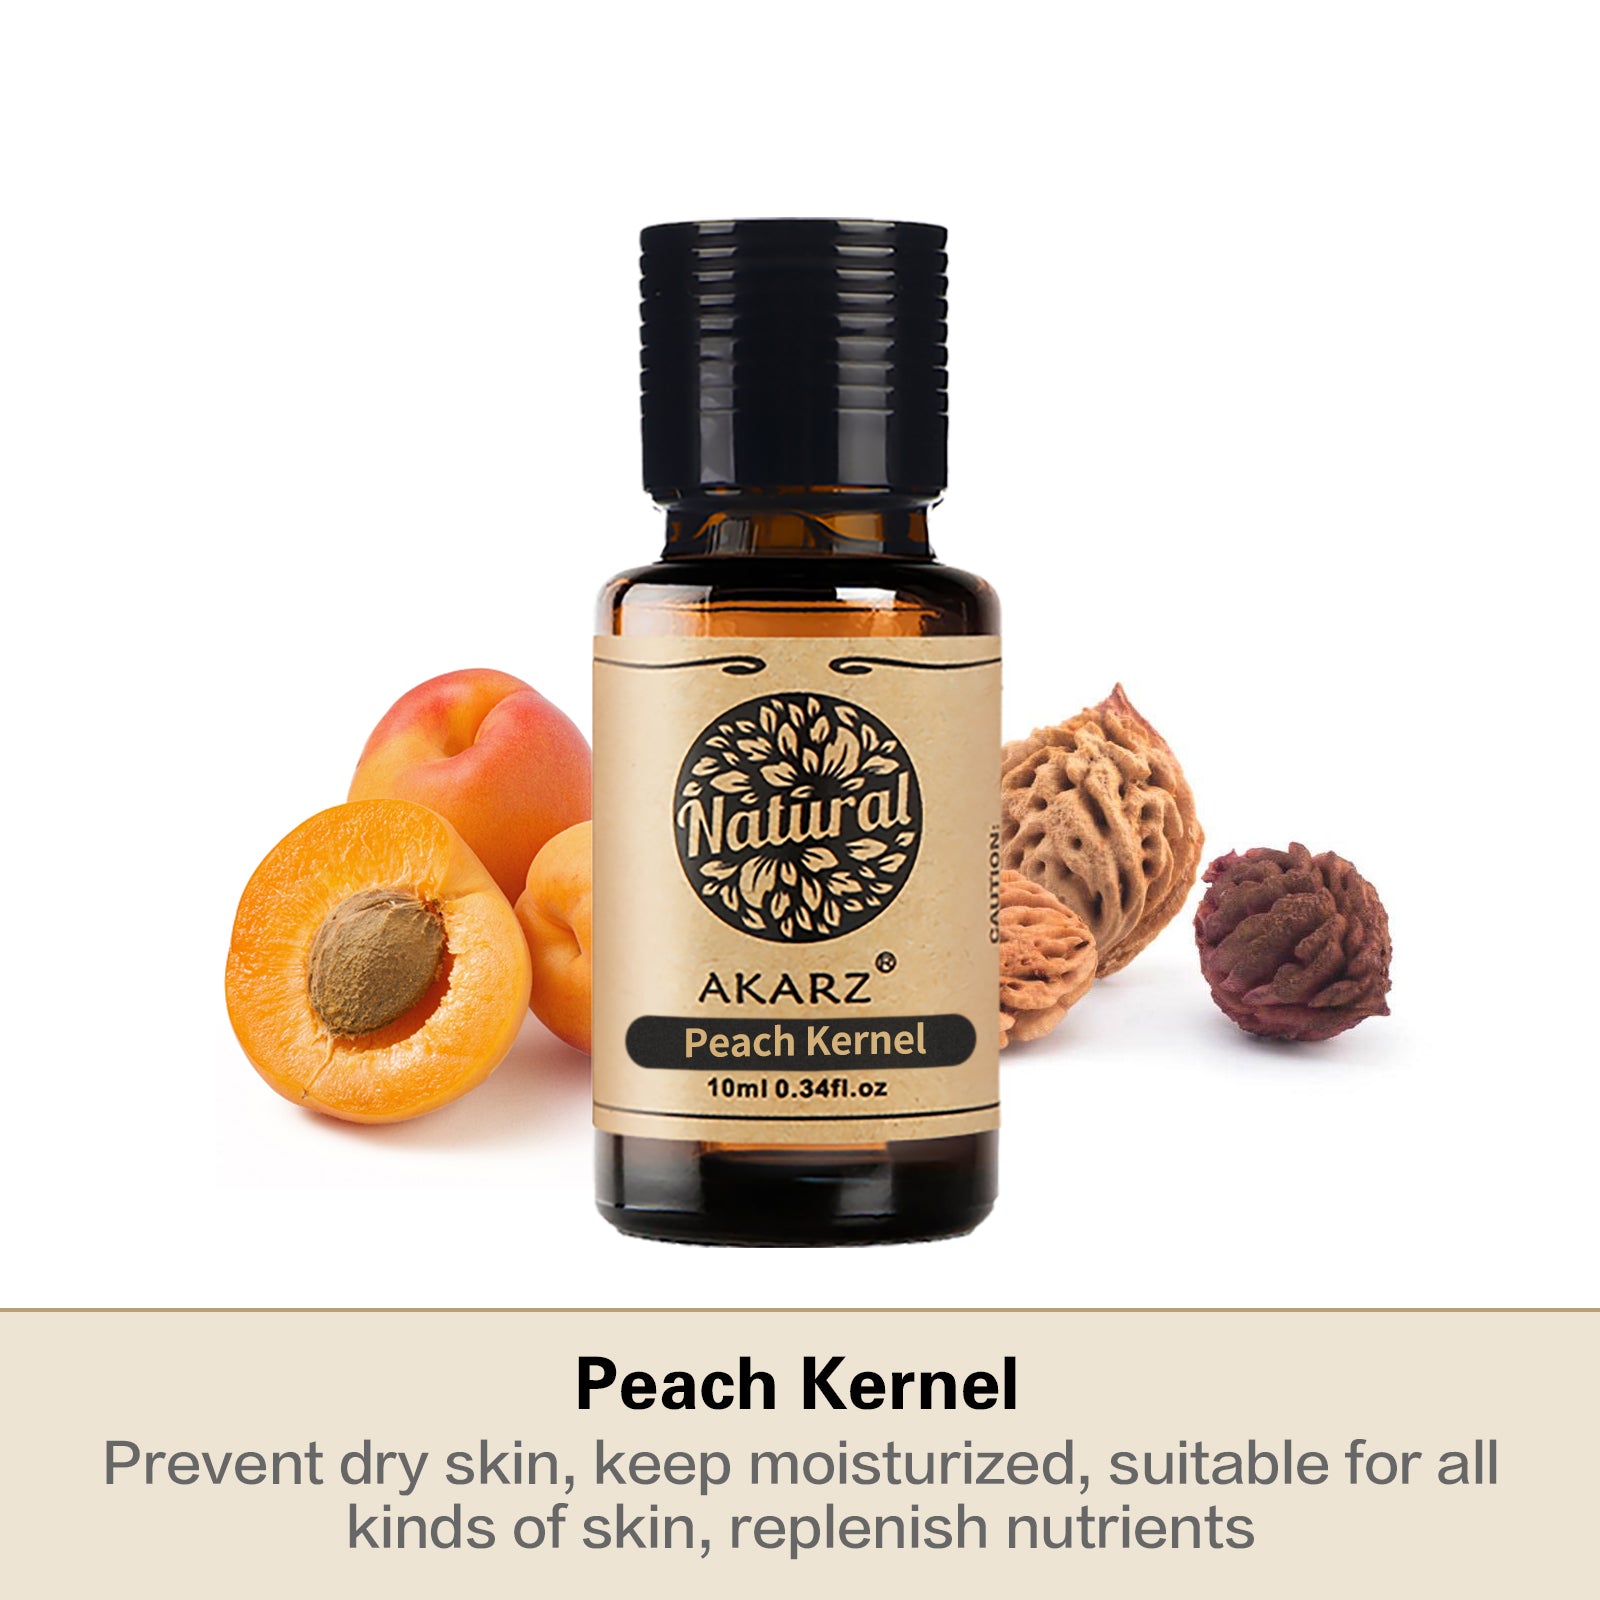 AKARZ DIY Massage Peach Kernel Oil Carrier for Skin Care and Aromatherapy, Moisturizing, 100% Pure